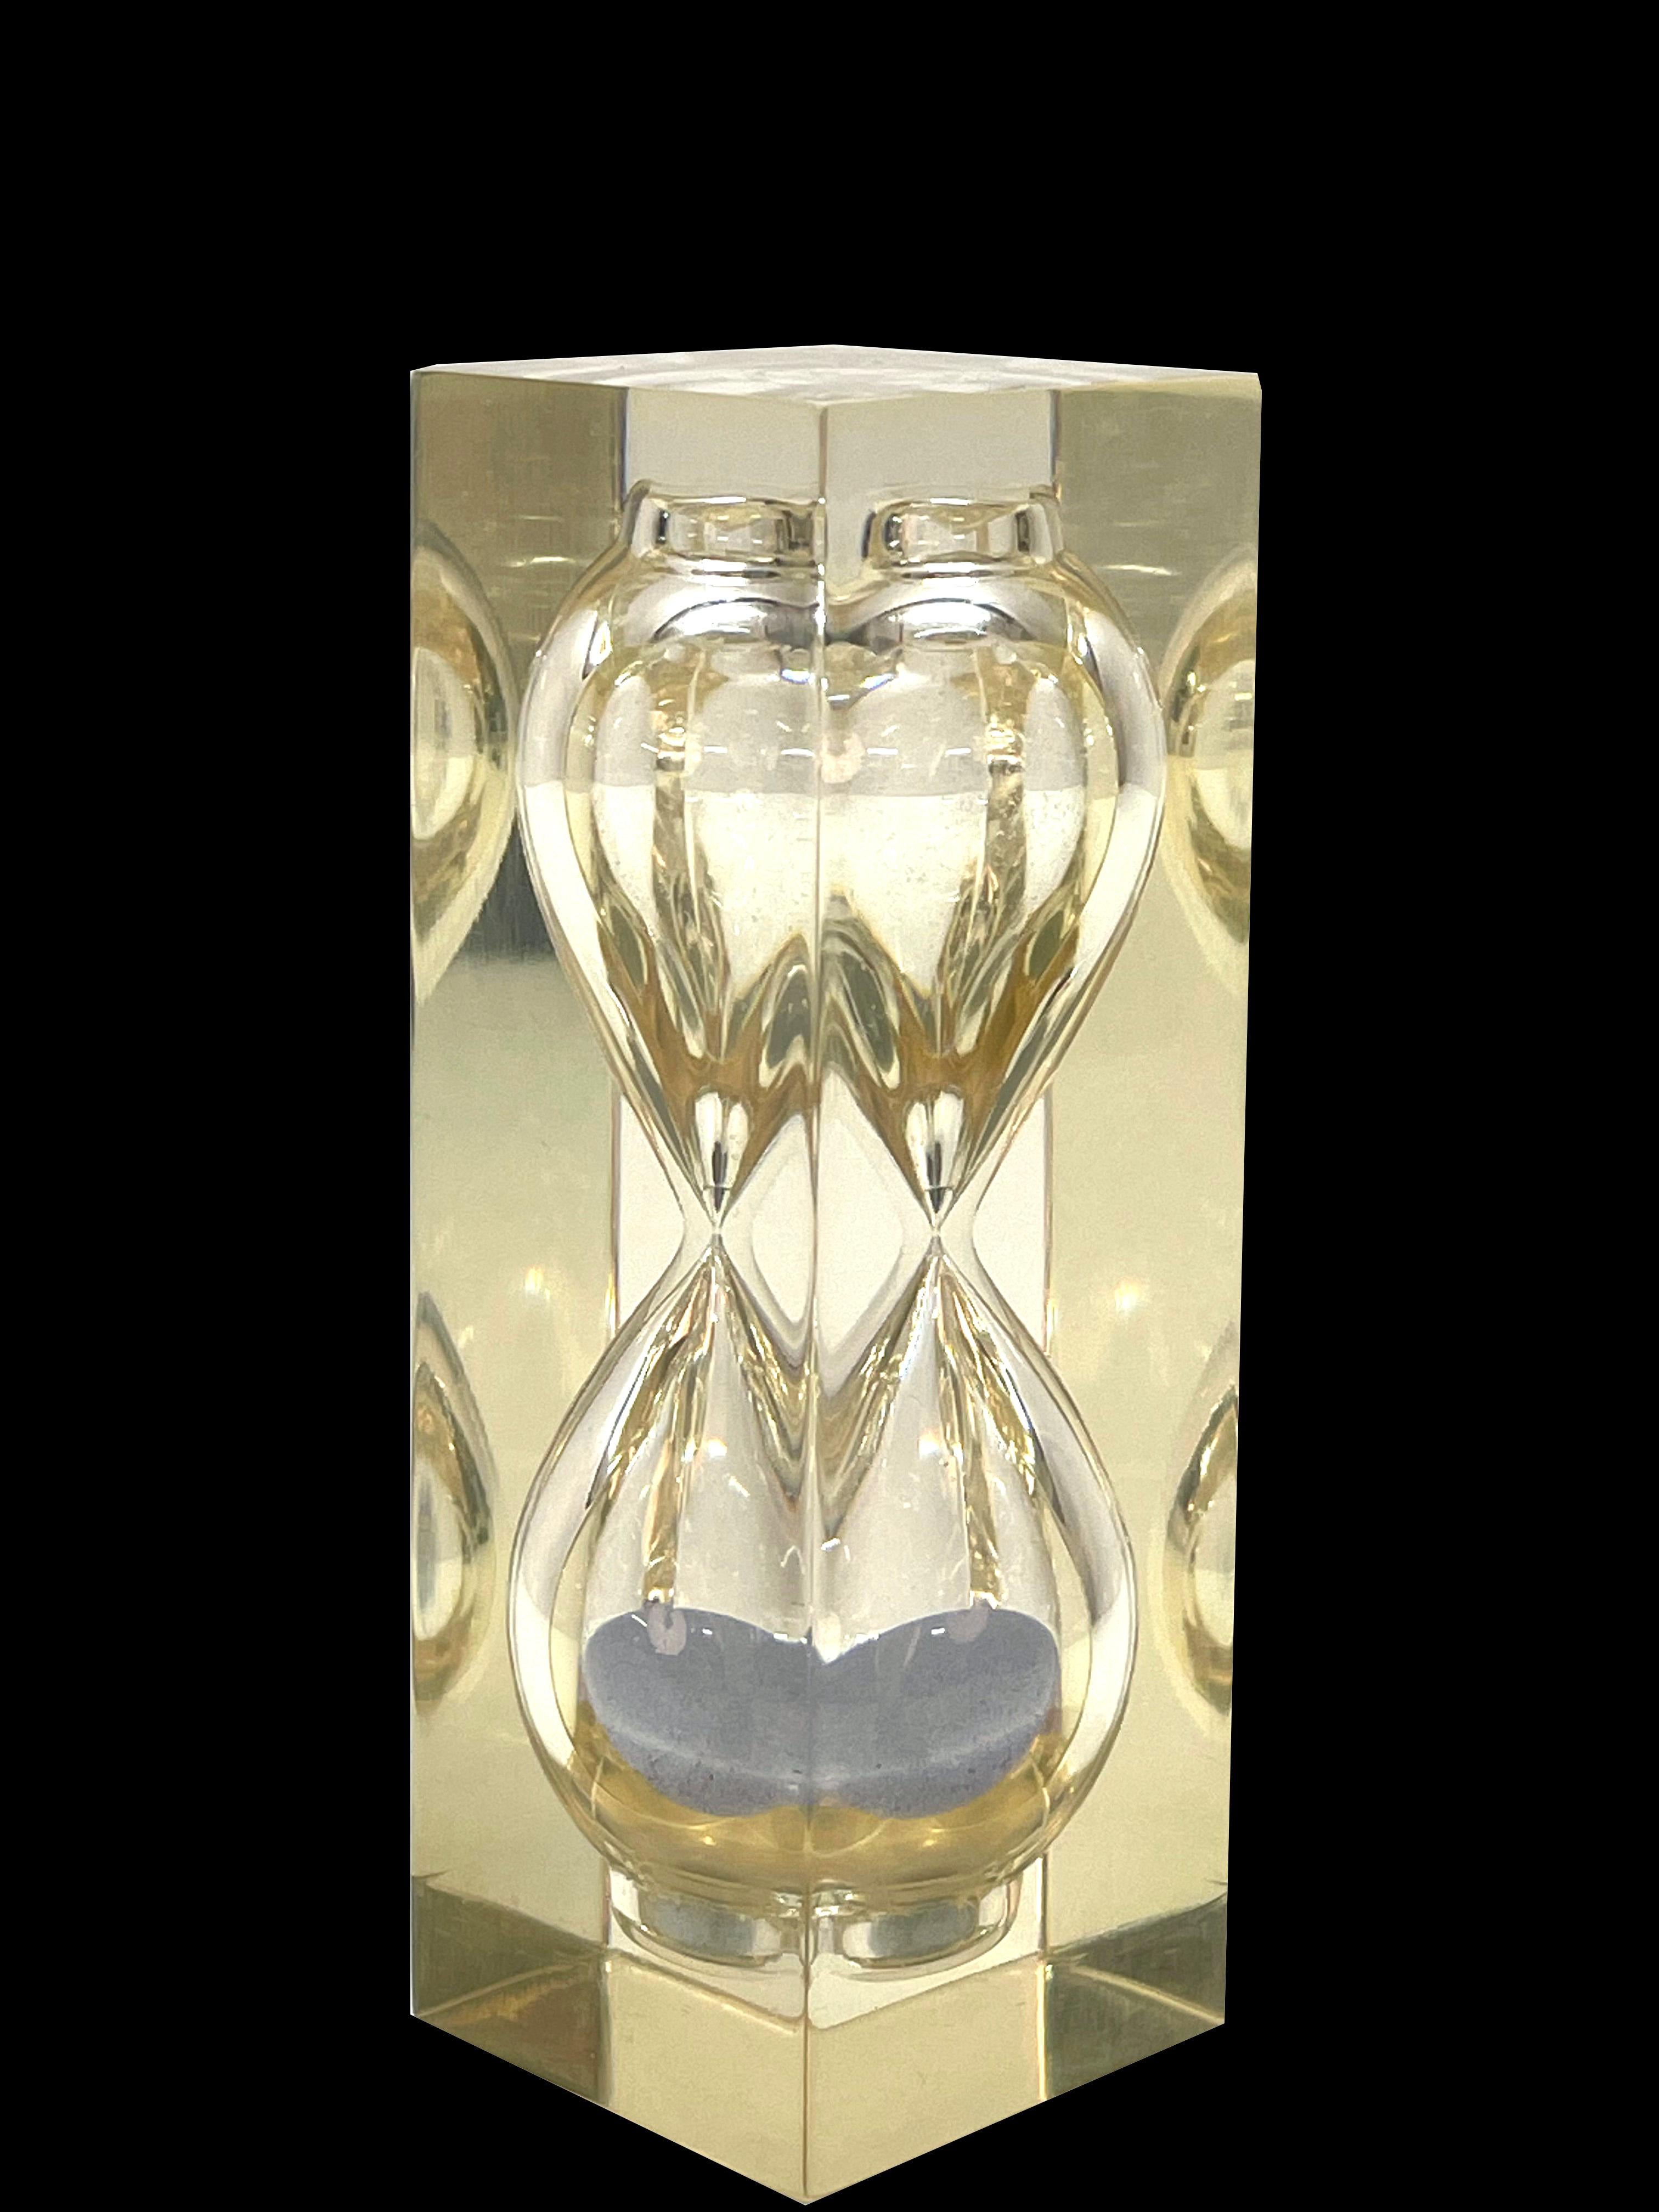 Midcentury Lucite Hourglass Sand Timer Sculpture After Charles Hollis Jones 1970 For Sale 6